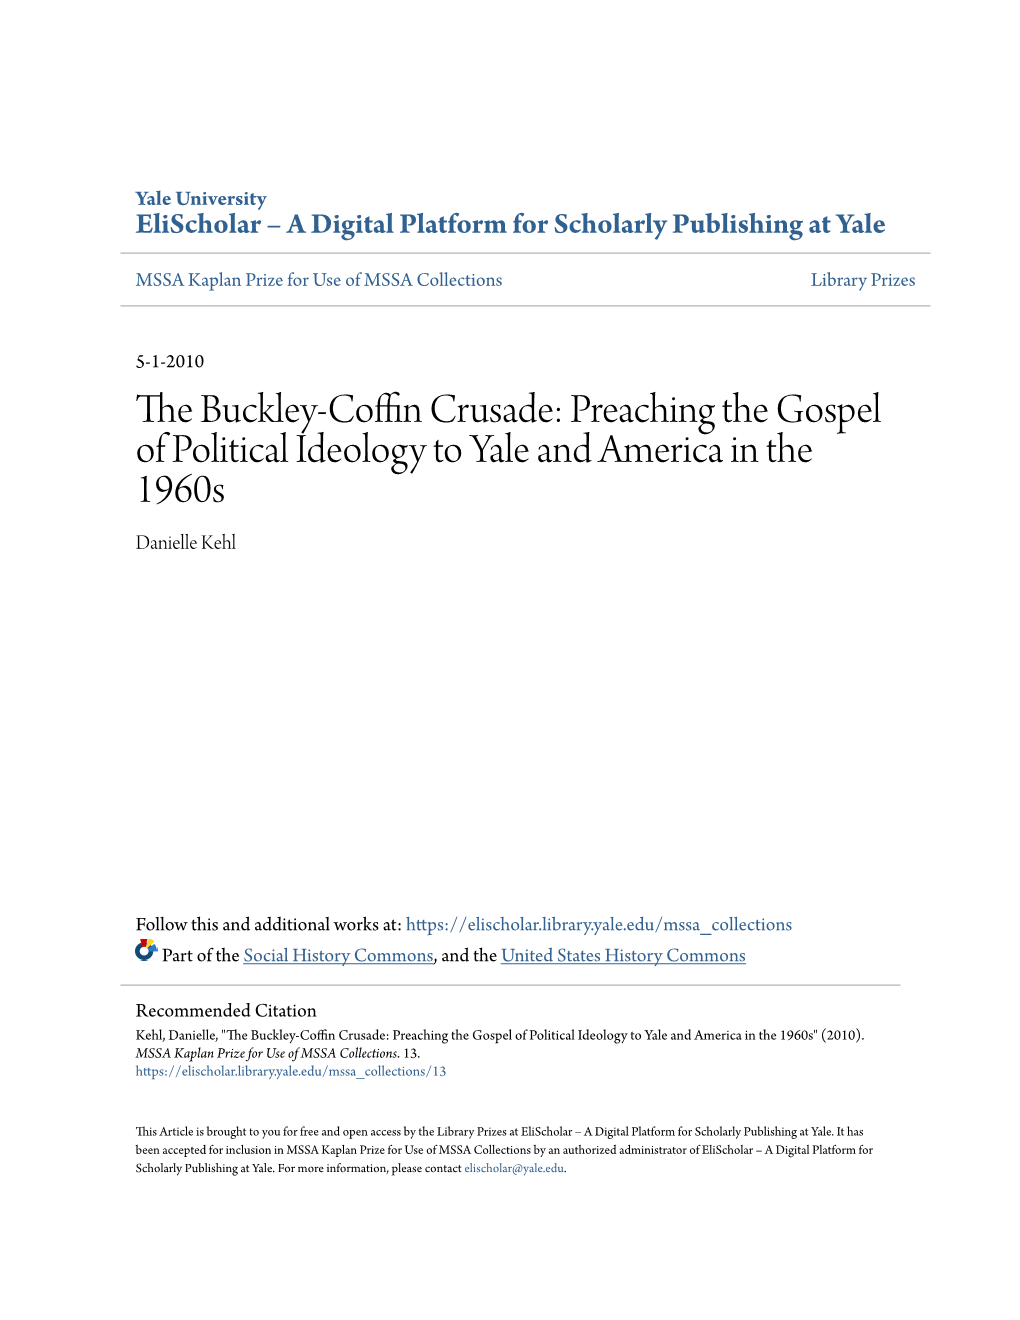 The Buckley-Coffin Crusade: Preaching the Gospel of Political Ideology to Yale and America in the 1960S